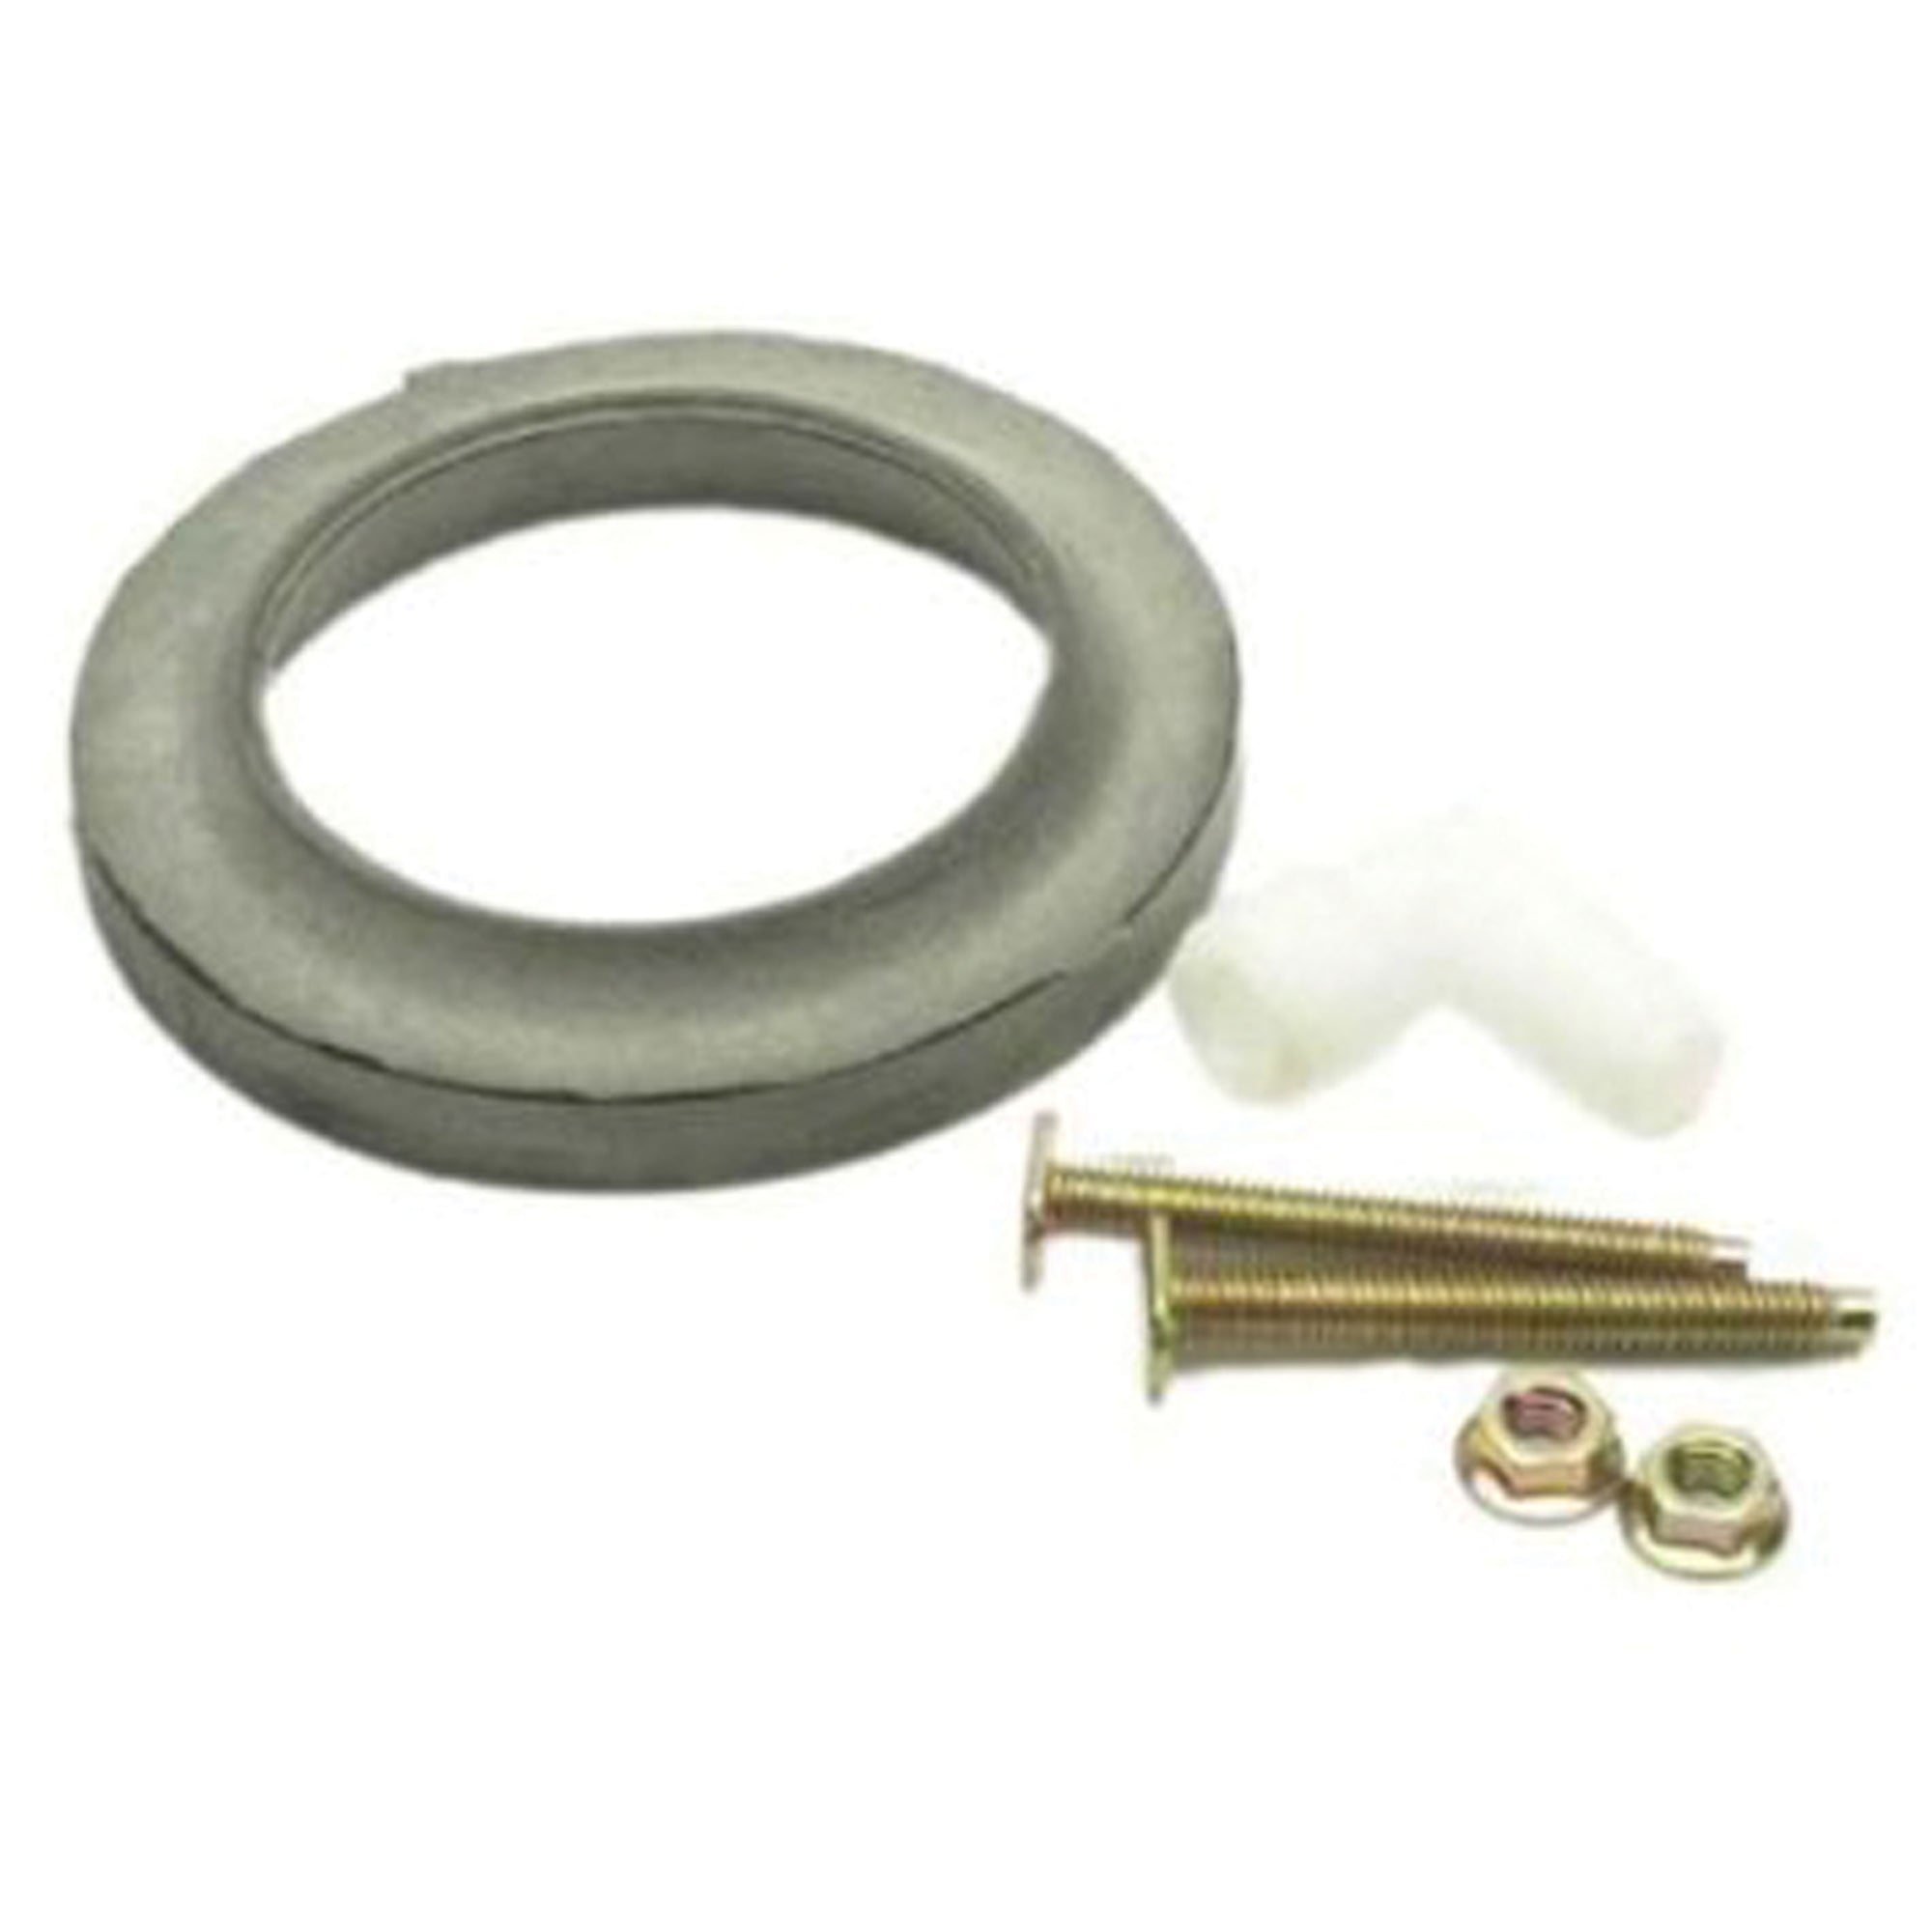 Thetford 42115 Style II China Bowl Toilet Closet Bolt Package